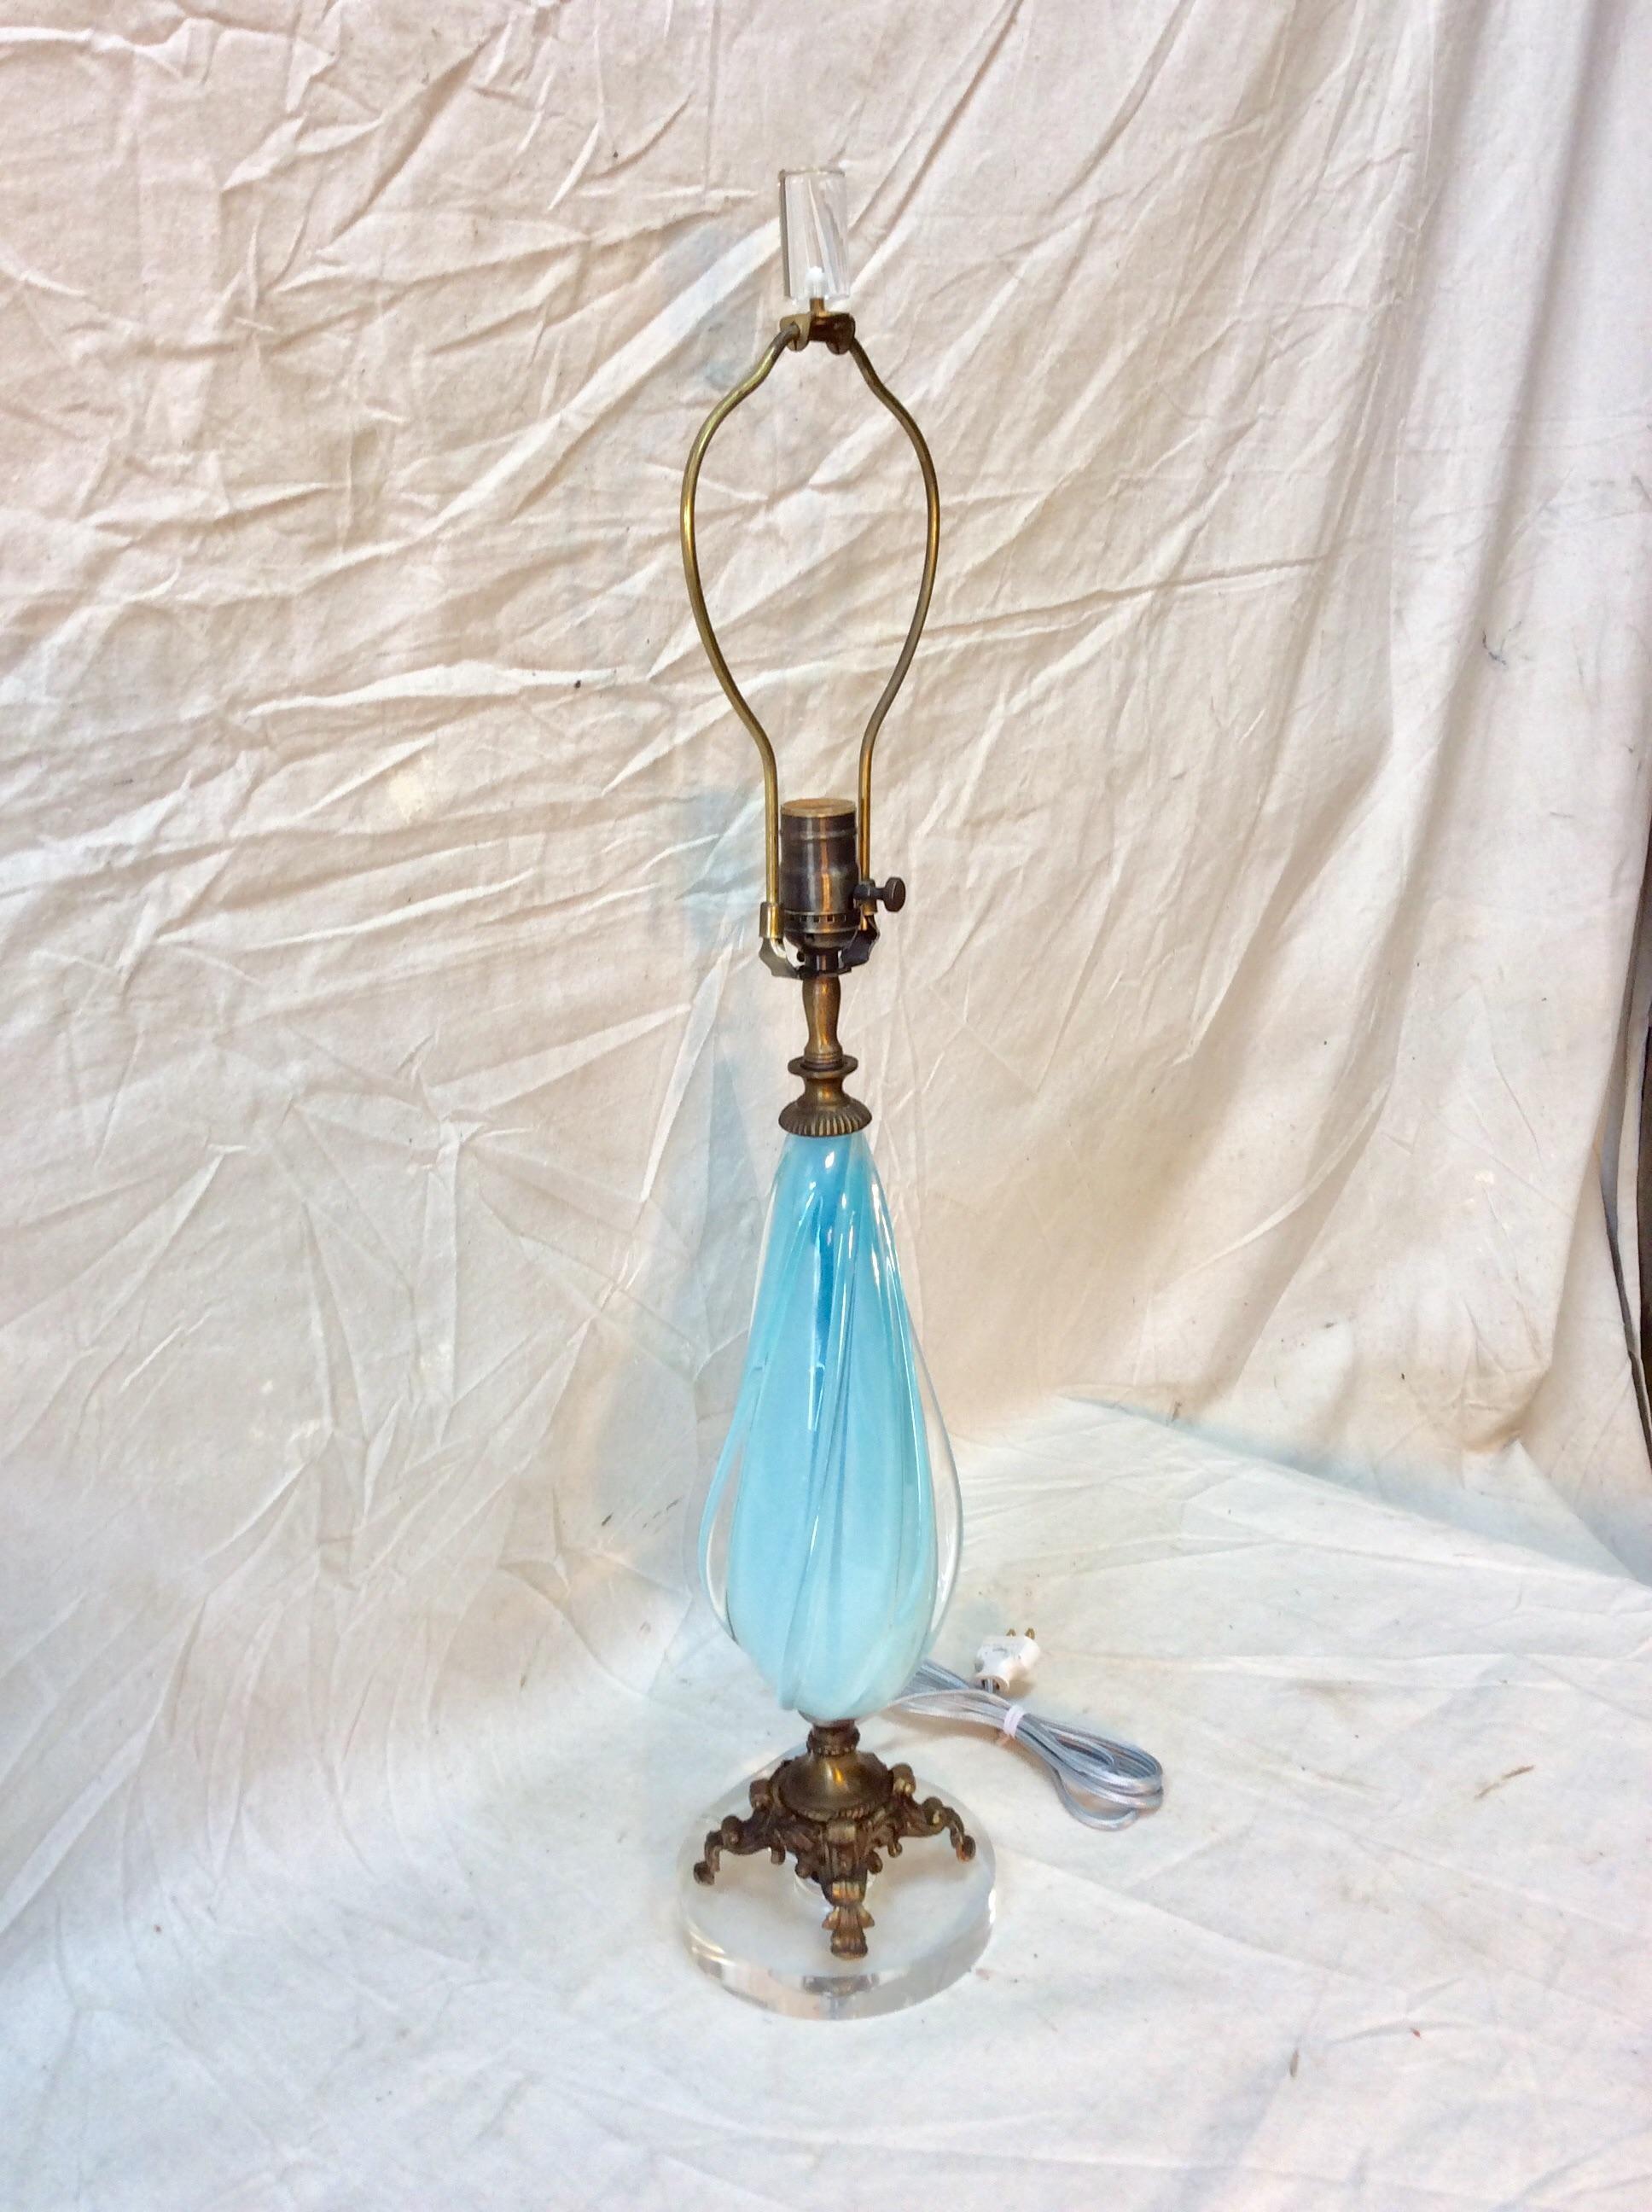 Amazing vintage 1960s Murano glass table lamp. The lamp features a light blue color glass swirl with the original brass base. This lamp have been professionally rewired to USA standards with the addition of a lucite base and finial.


6